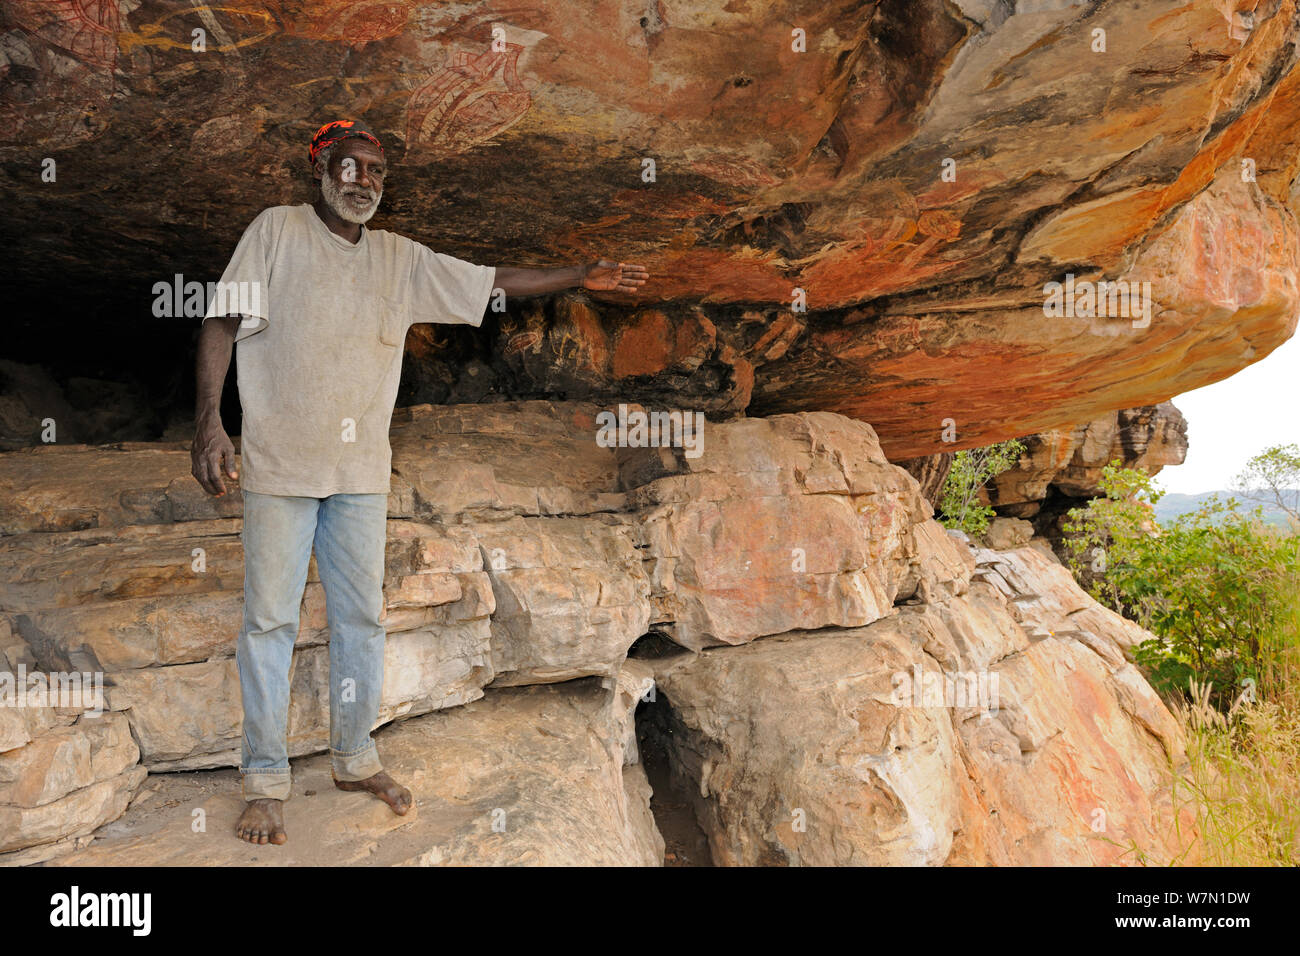 Aboriginal cave art being explained by guide Arnhemland, North West Territories, Australia, May 2009 Stock Photo